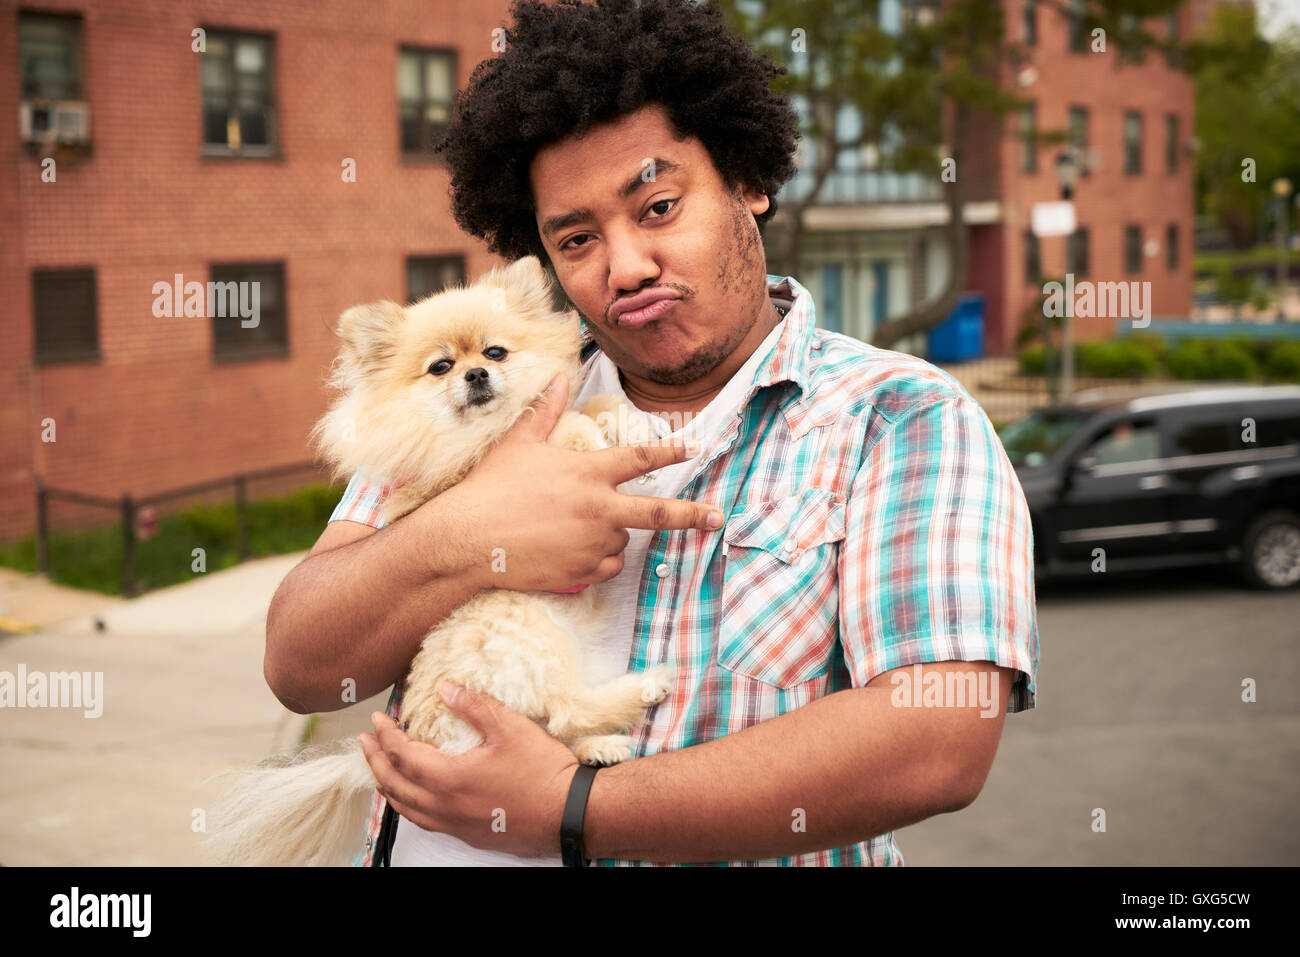 Mixed Race man gesturing peace with dog in city Stock Photo